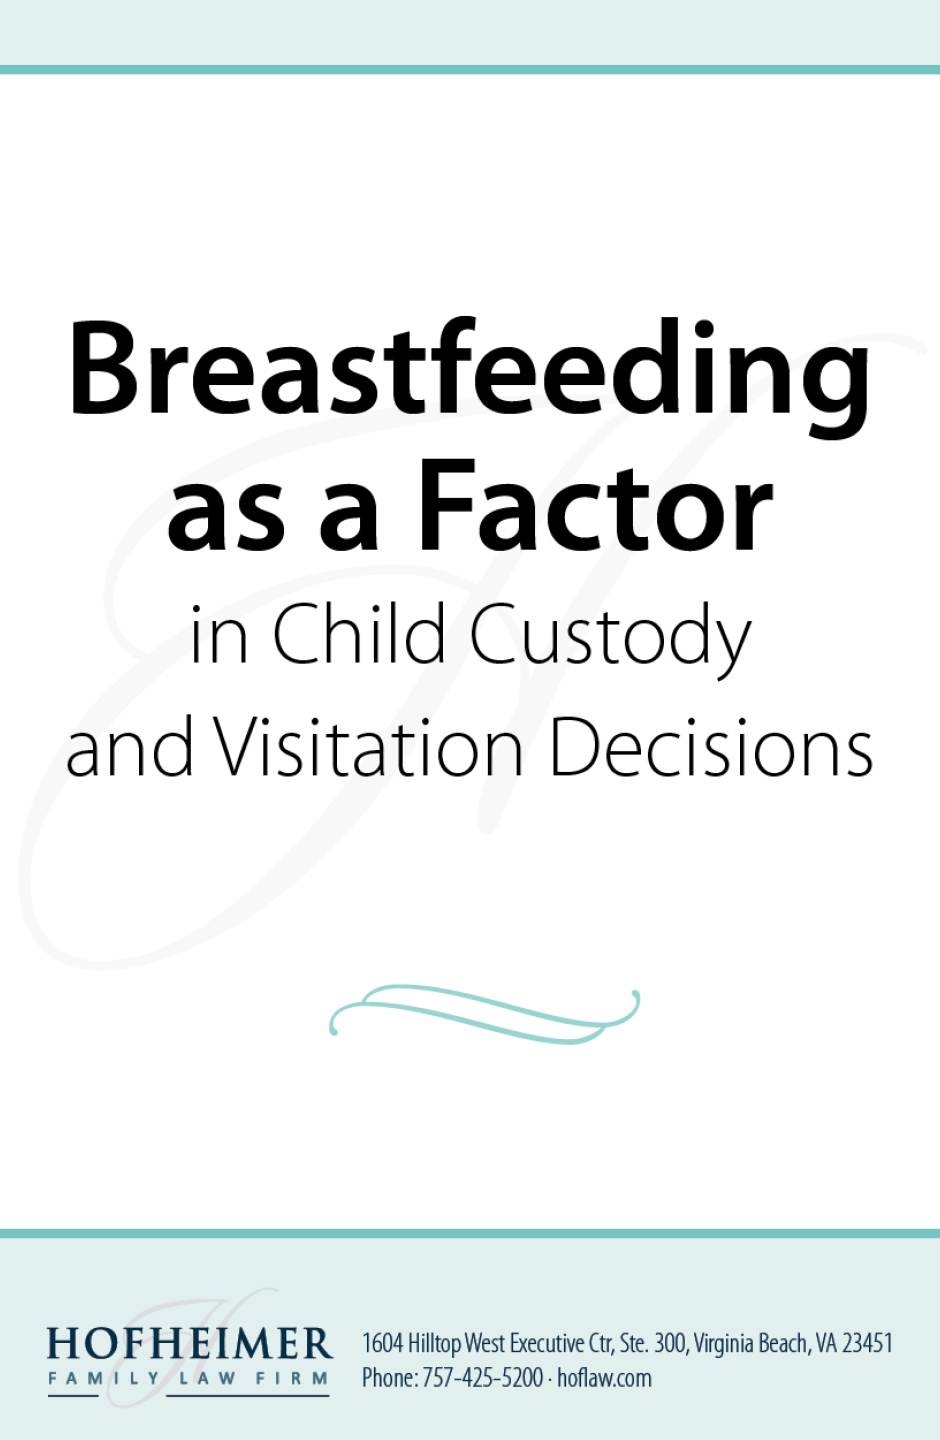 Breastfeeding as a Factor in Child Custody and Visitation Decisions